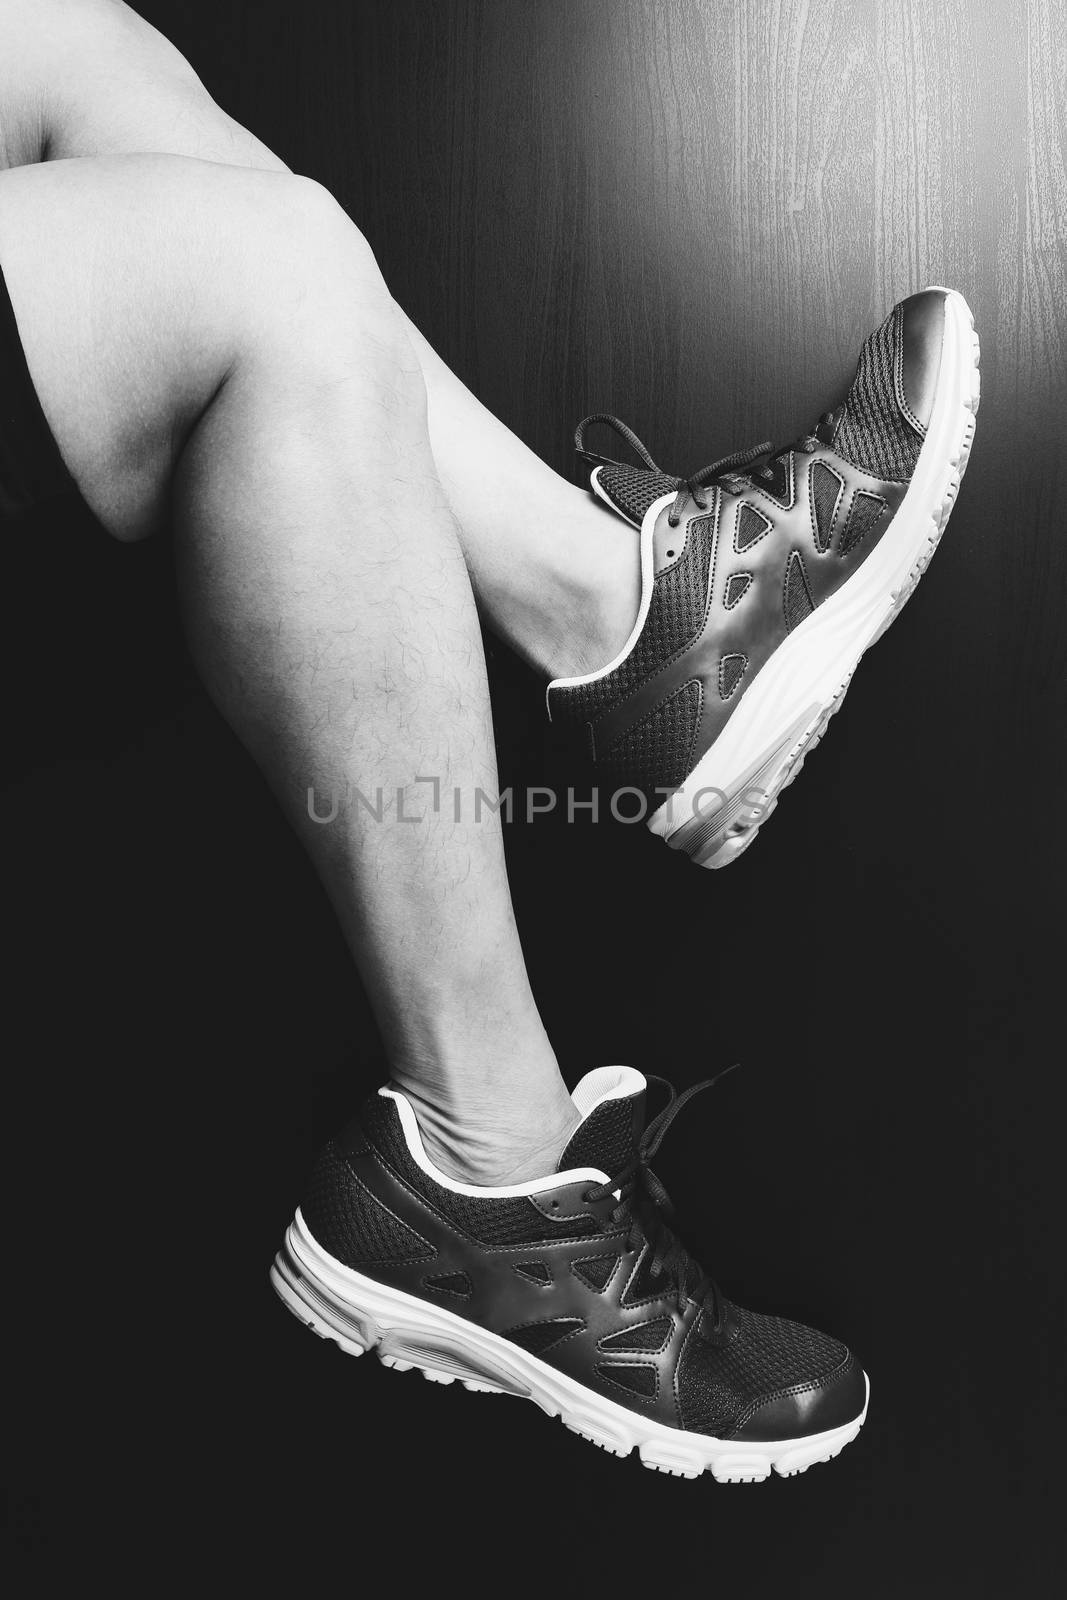 Runner sportsman holding ankle in pain with Broken twisted joint running sport injury and Athletic man touching foot due to sprain,black and white